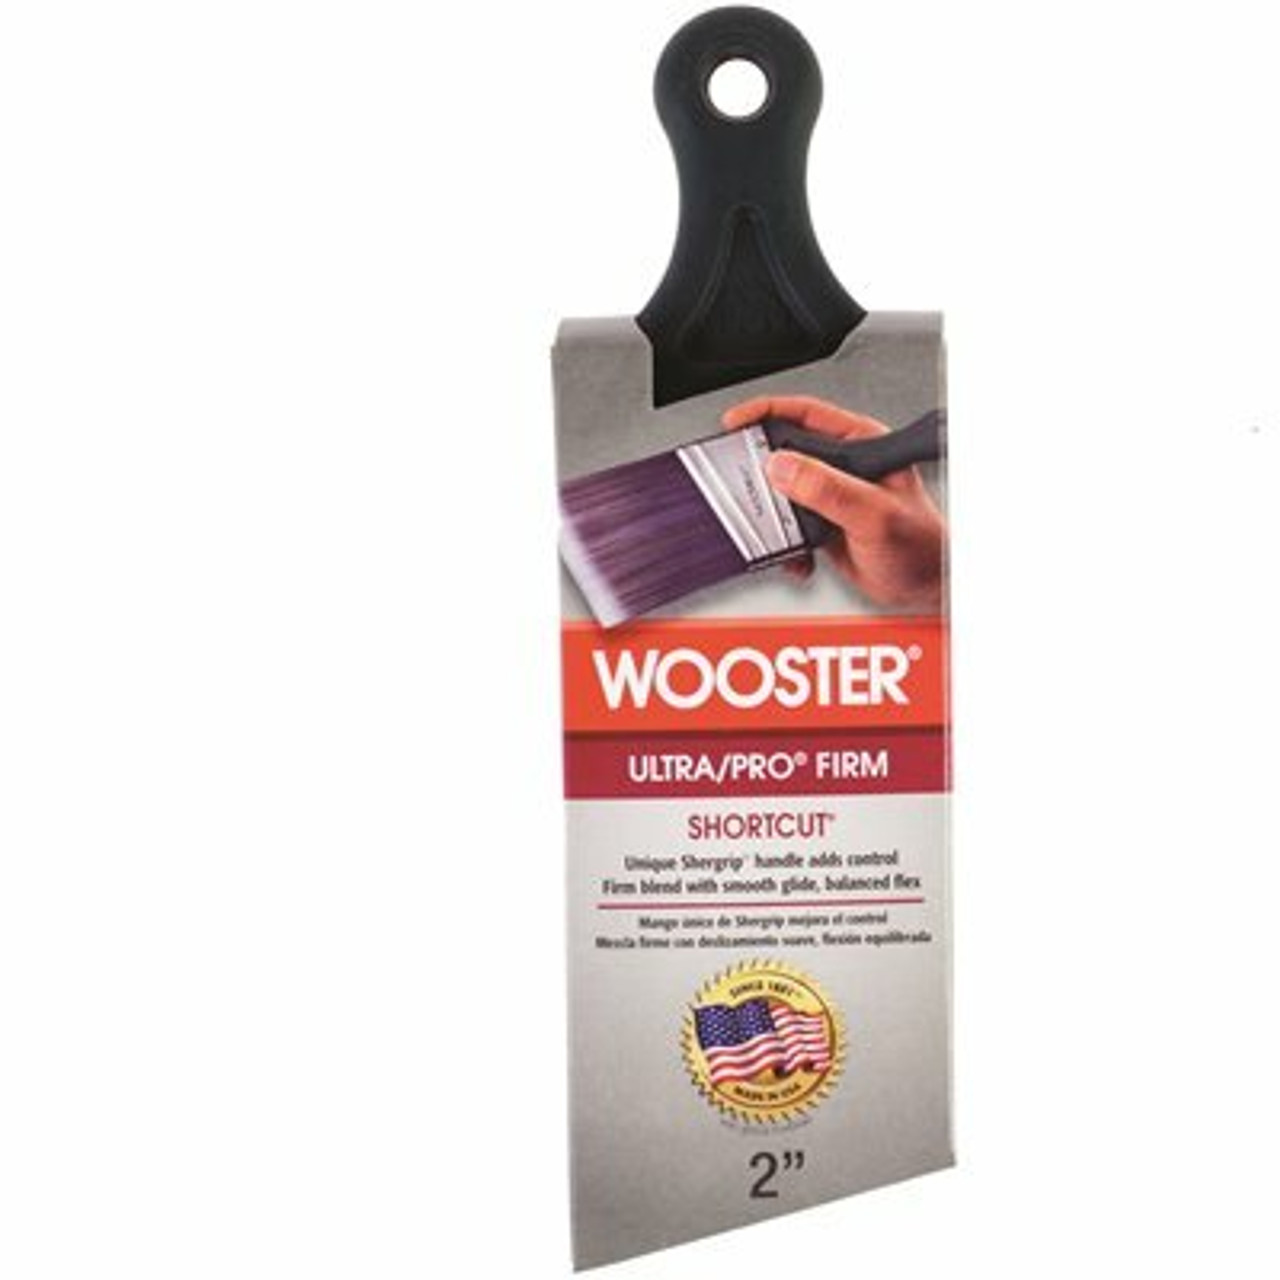 Wooster 2 In. Ultra/Pro Firm Shortcut Nylon/Polyester Angle Sash Brush